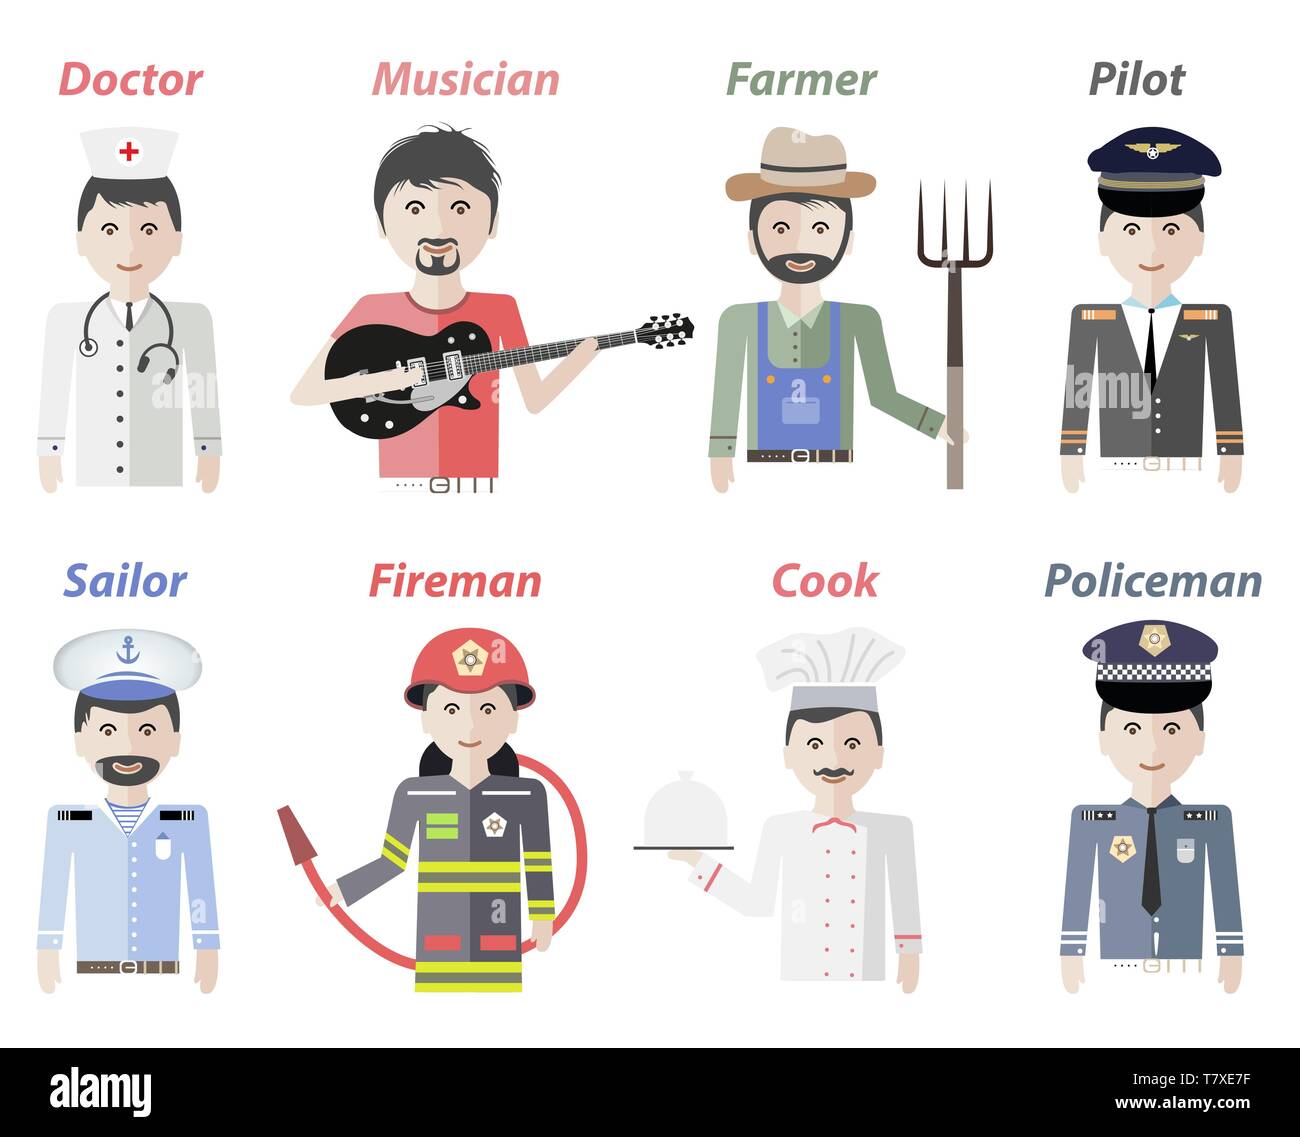 Vector human personages of different professions Stock Vector